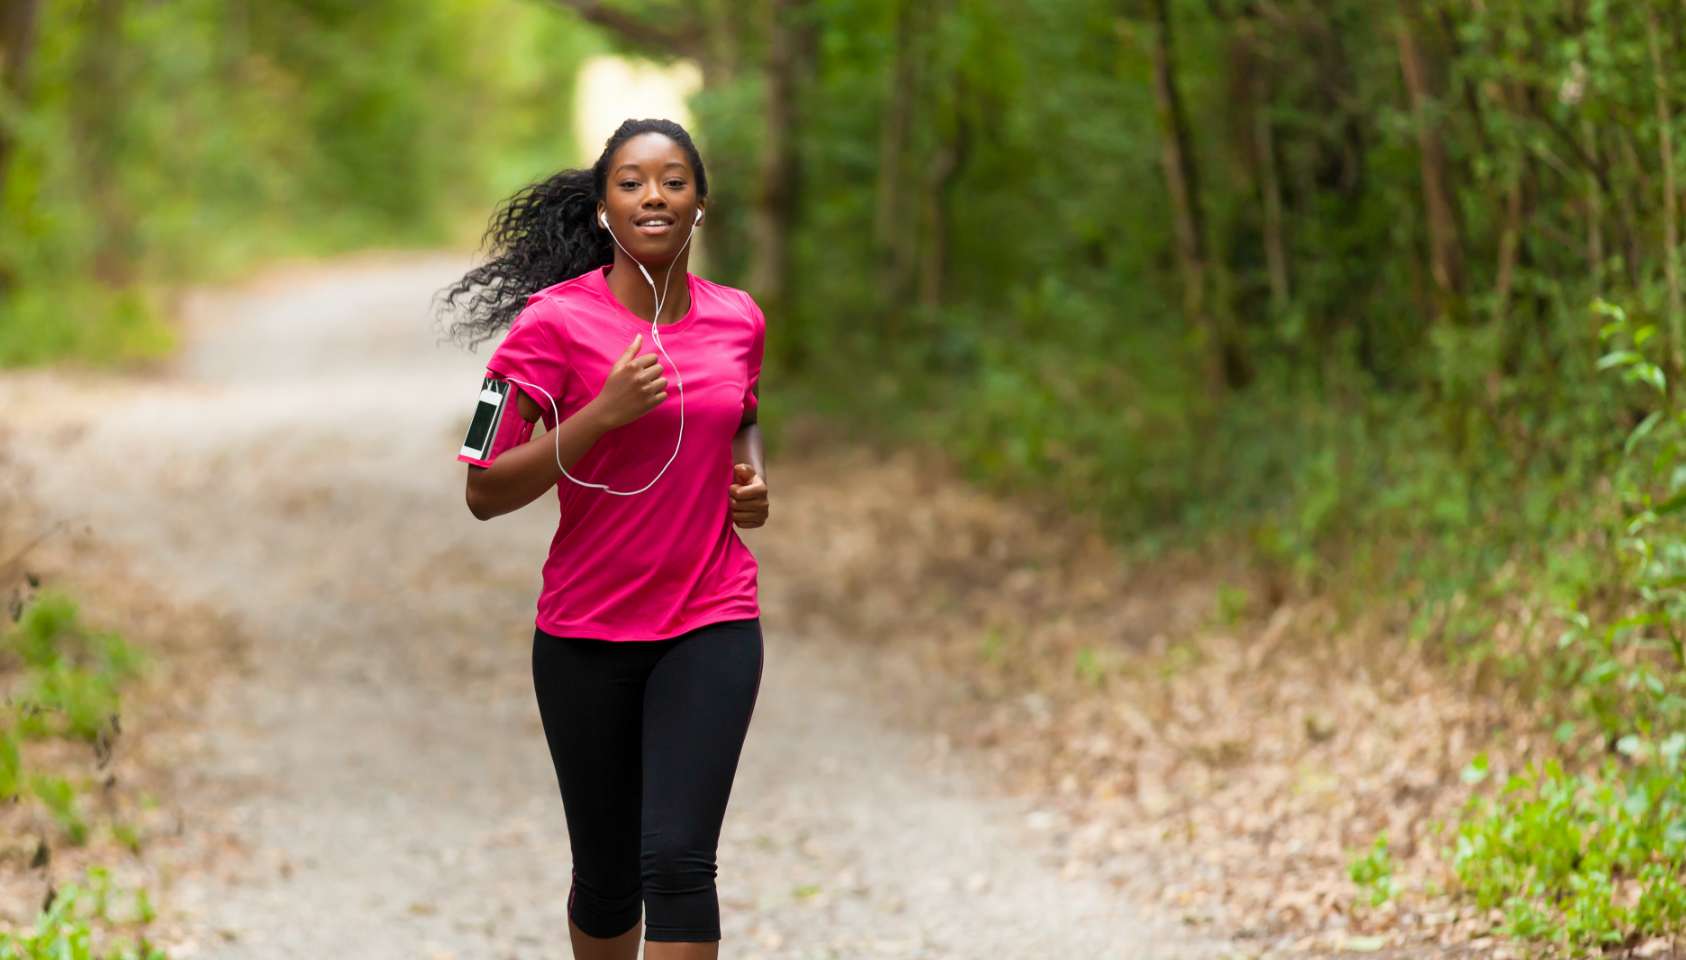 Active woman running in athletic black leggings and a pink shirt, carrying her phone in an arm band and wearing hanging earphones while enjoying a run on a dirt road surrounded by a lush forest.